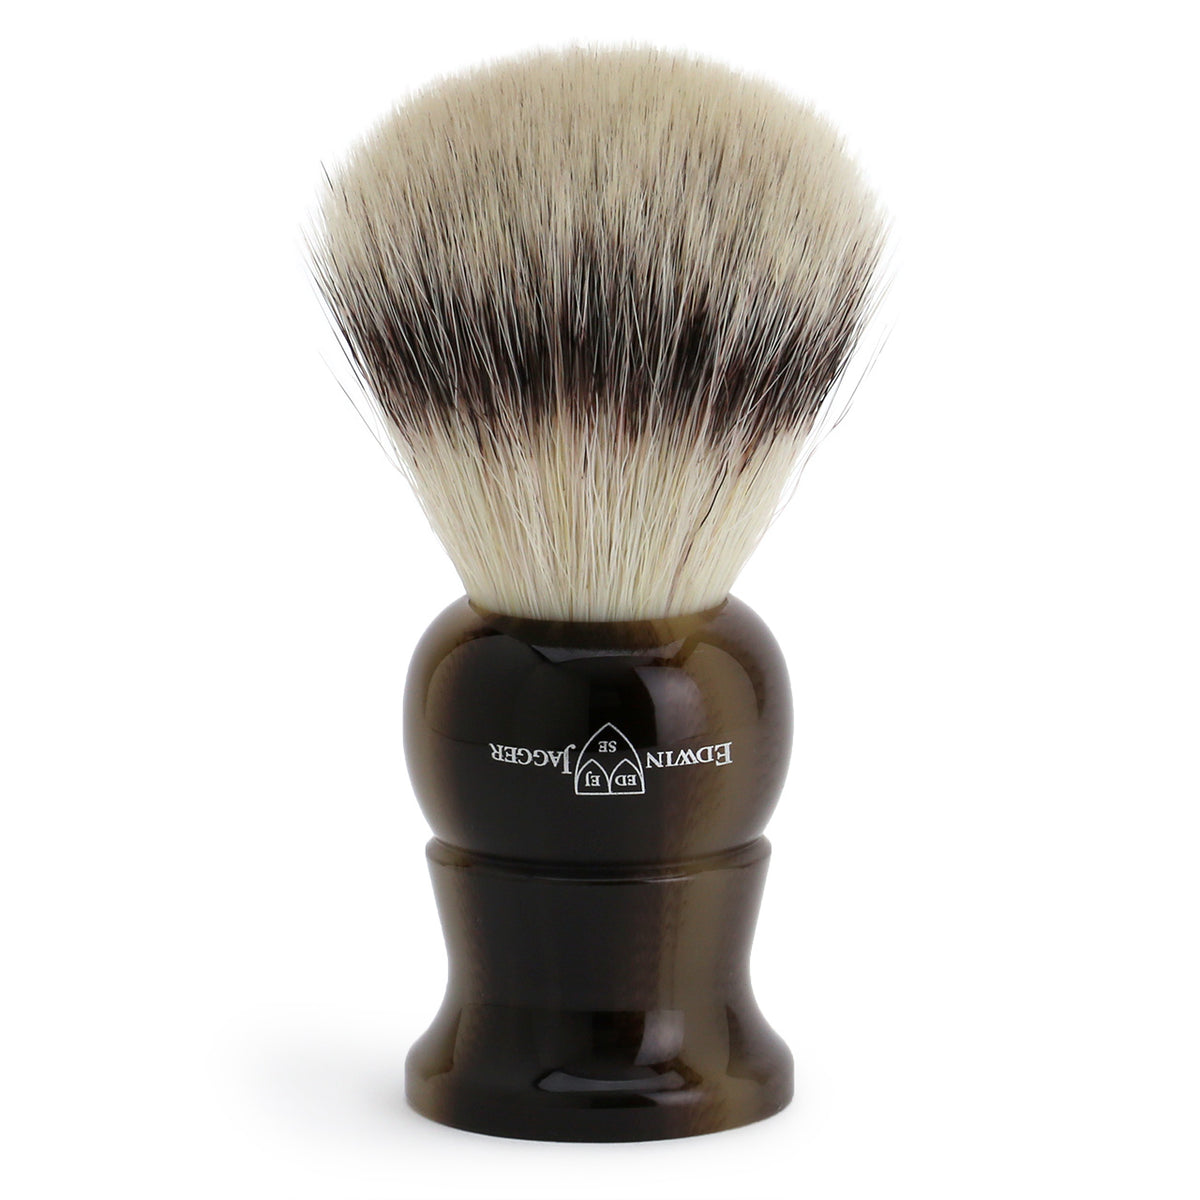 Edwin Jagger Imitation Light Horn Shaving Brush Synthetic Silver Tip with Drip Stand - Extra Large